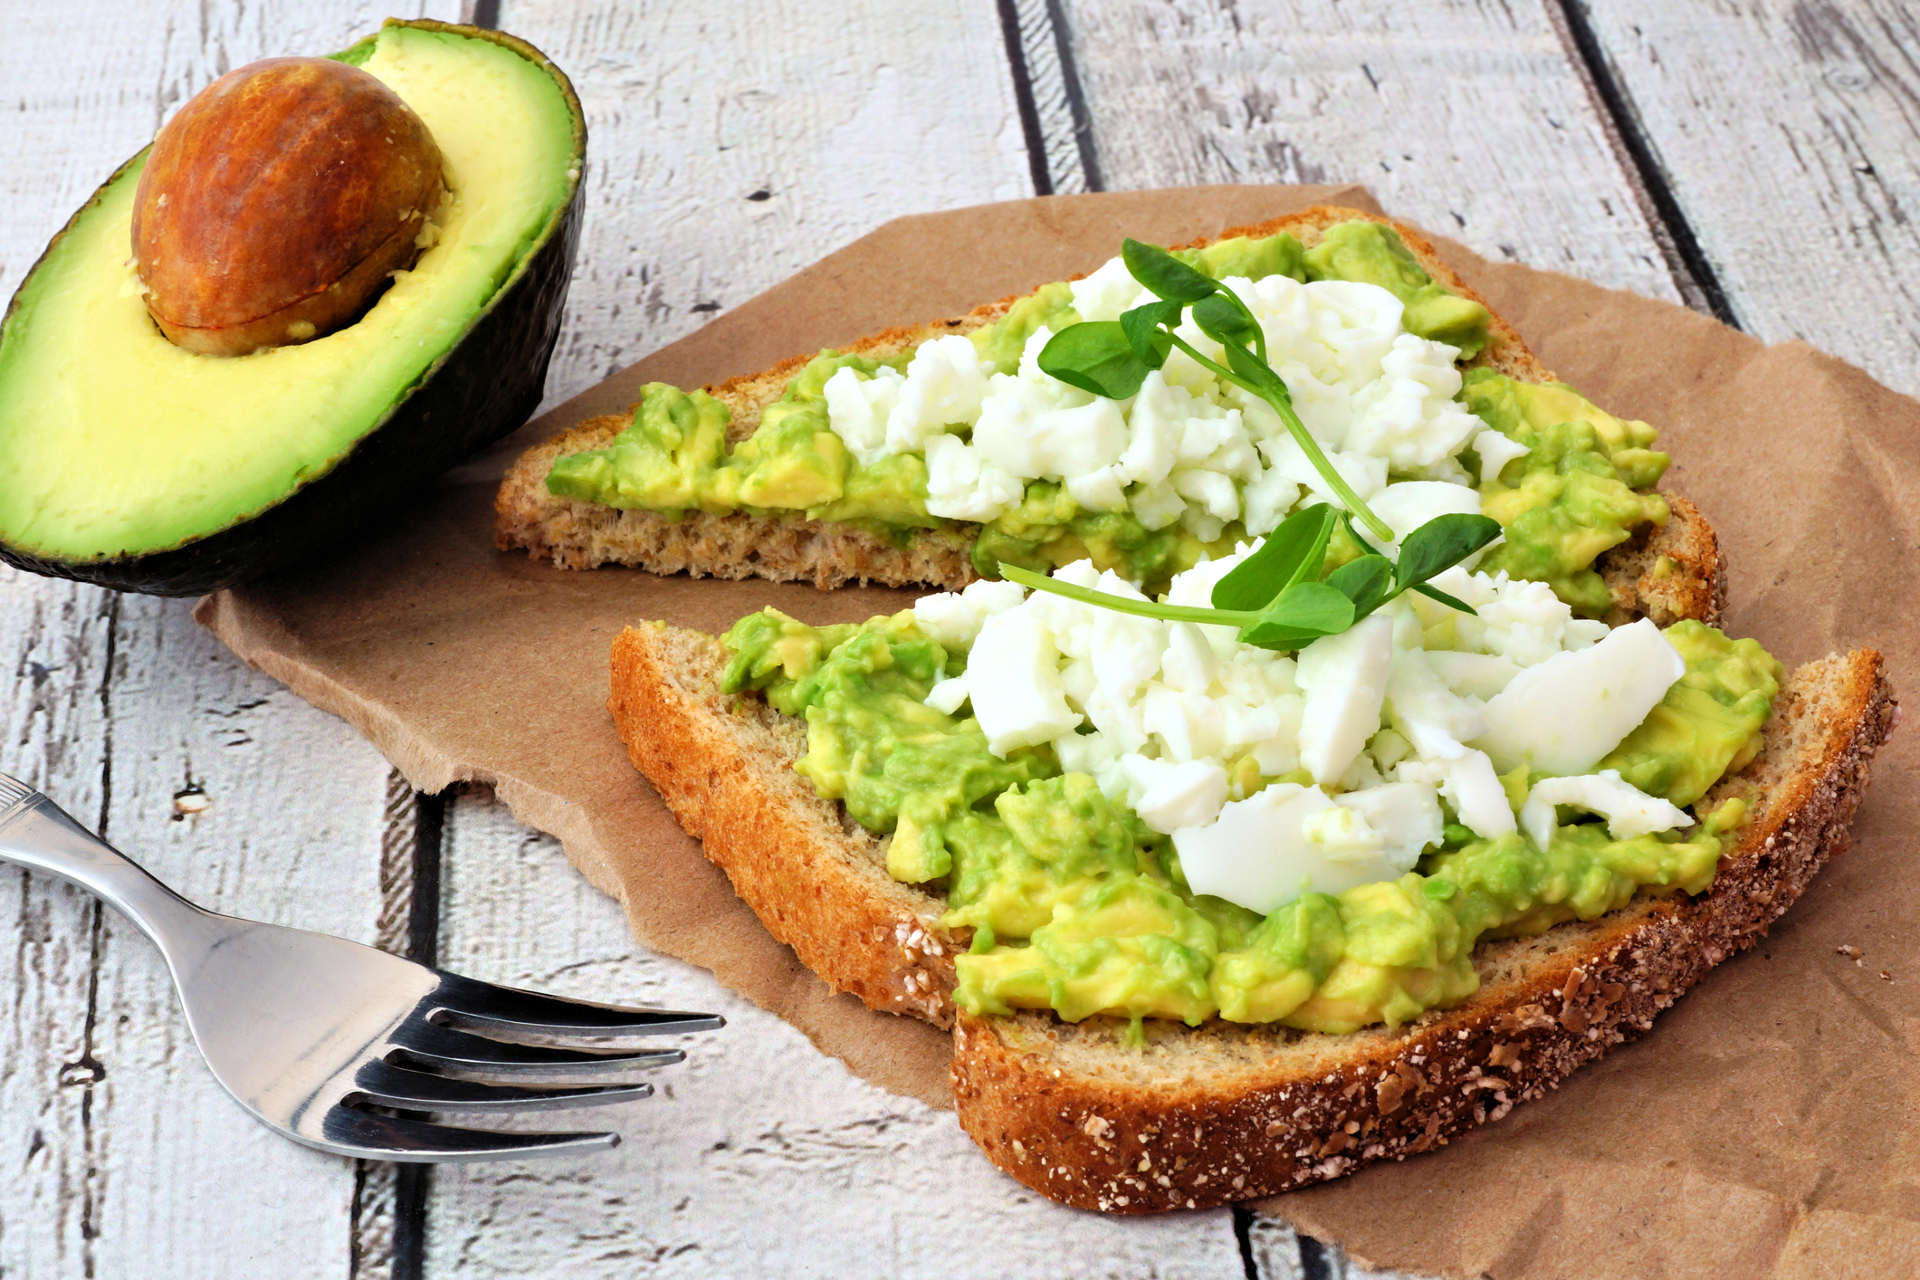 Should Vegans Avoid Avocados And Almonds?